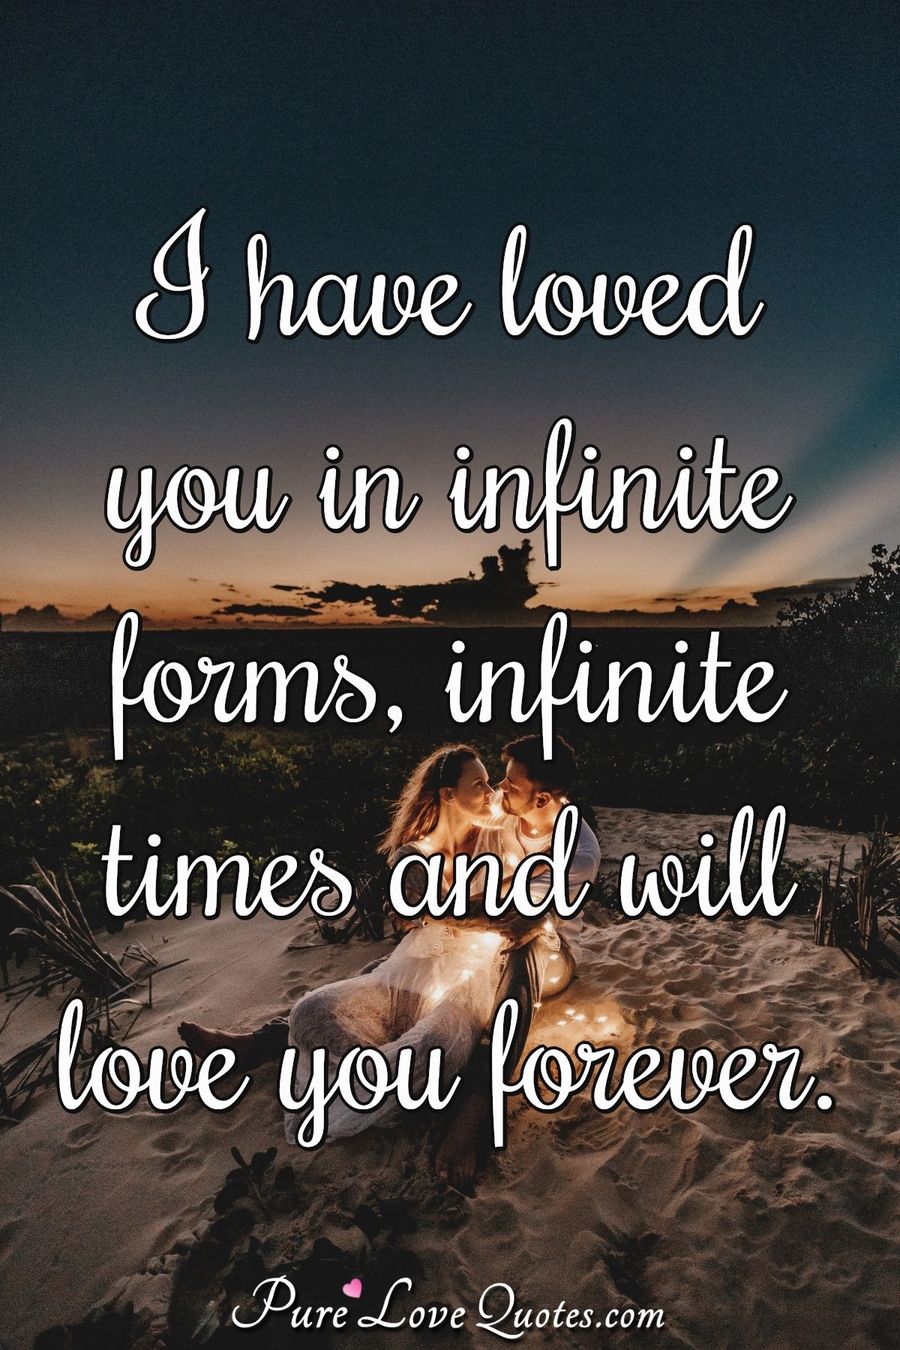 I have loved you in infinite forms, infinite times and will love you ...